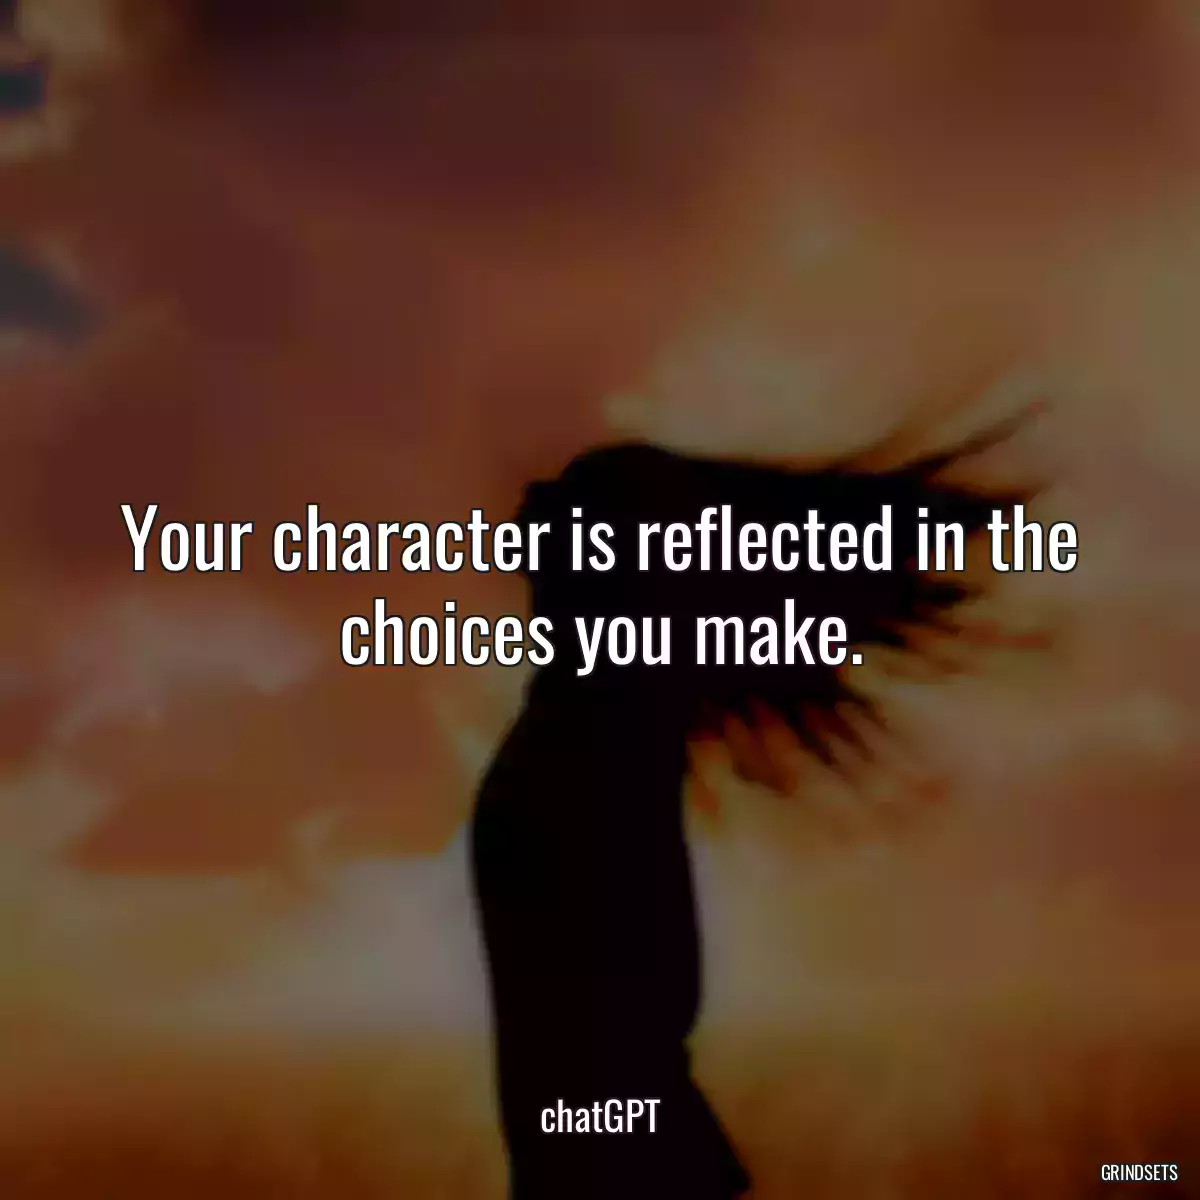 Your character is reflected in the choices you make.